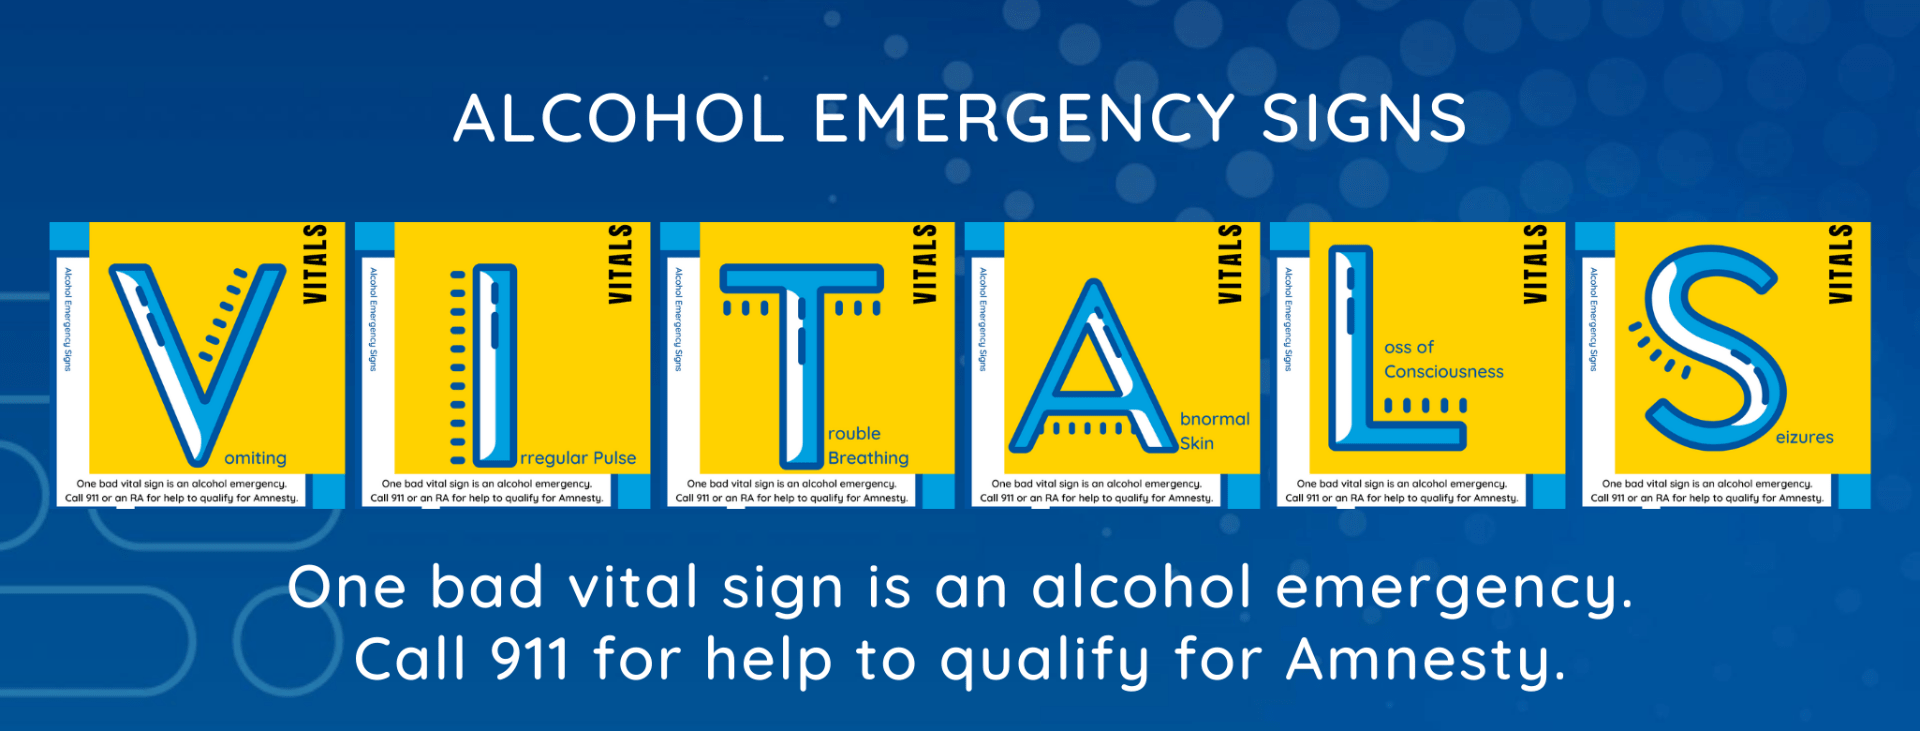 text: alcohol emergency signs: VITALS - one bad vital sign is an alcohol emergency. call 911 for help to qualify for amnesty.